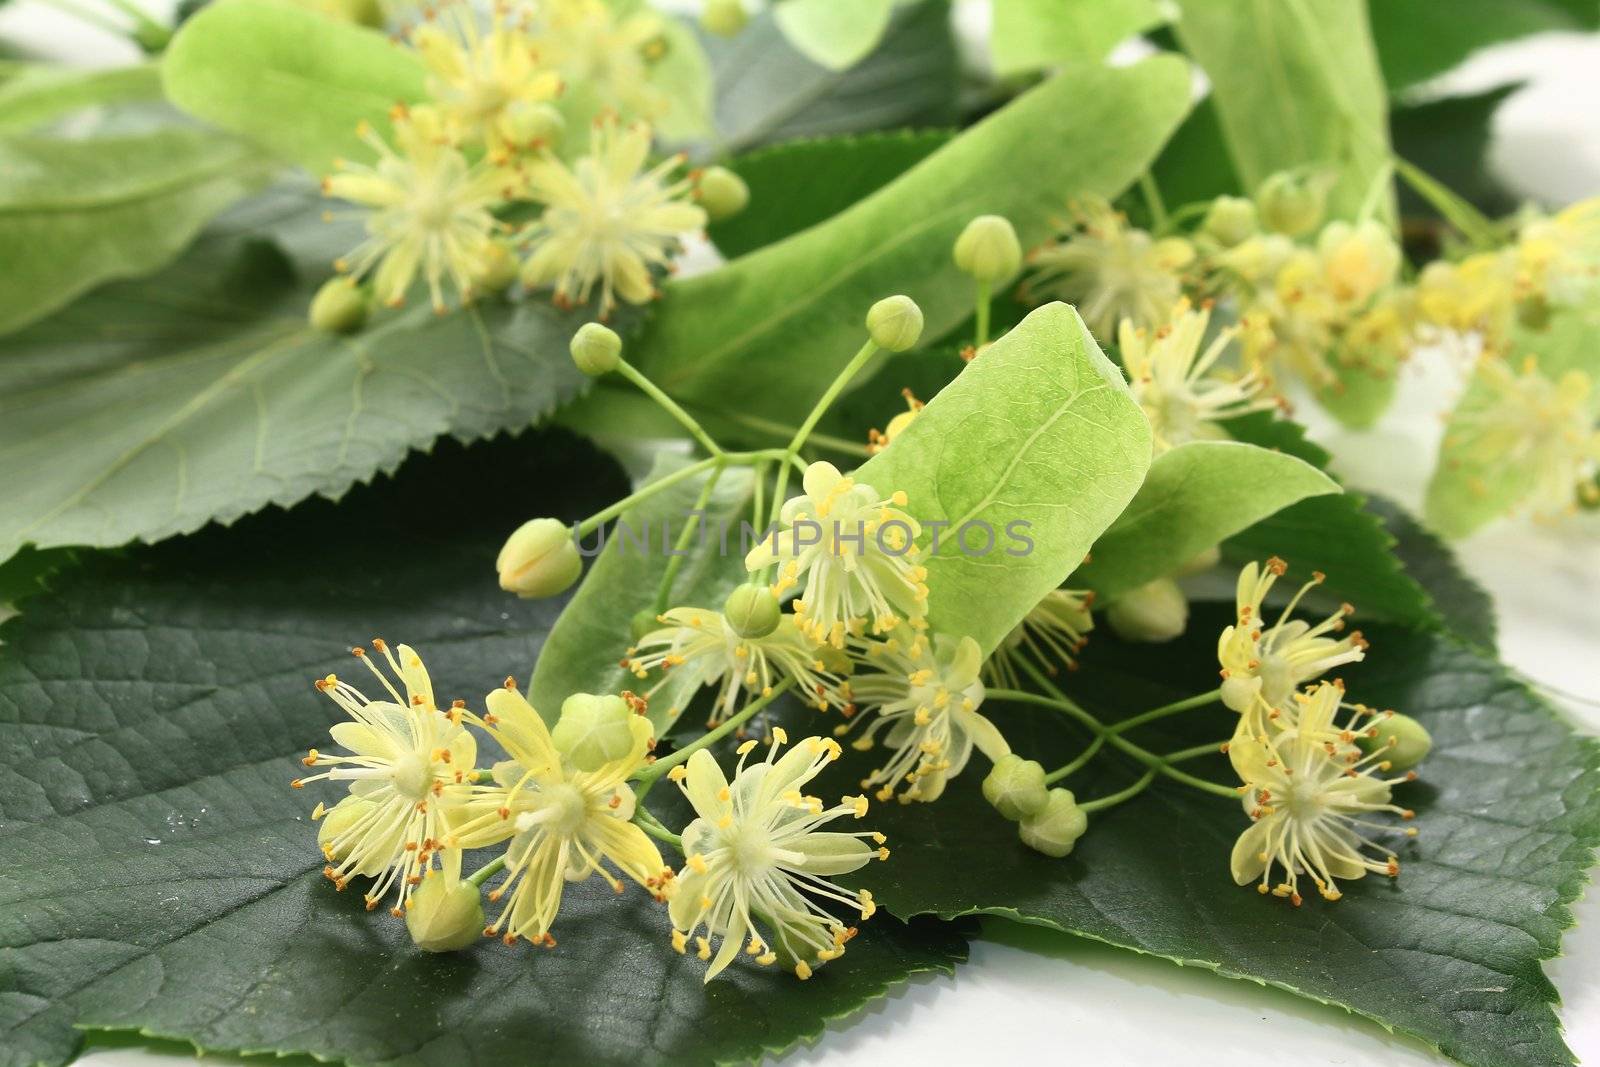 Linden blossoms and leaves on a light background